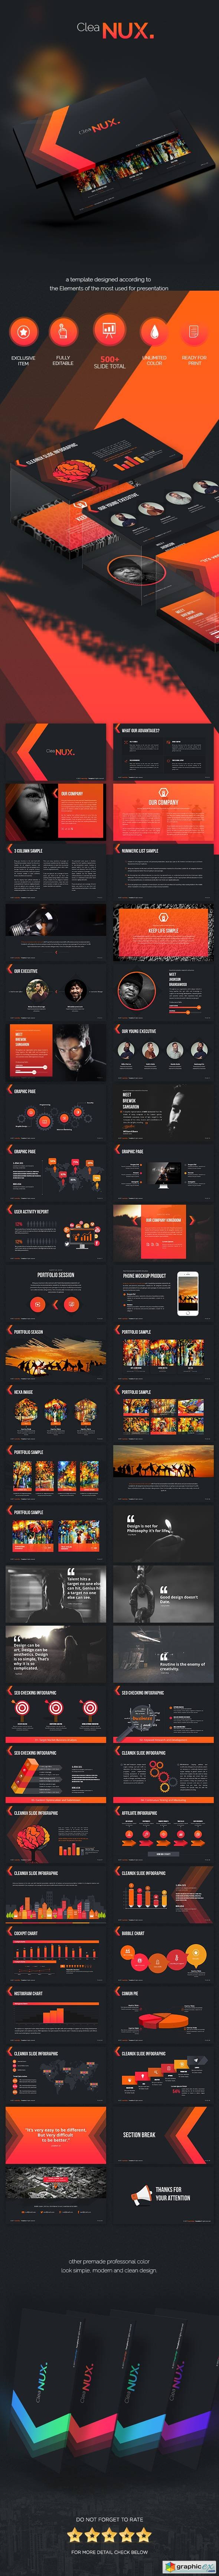 Cleanux - Powerpoint Presentation Template